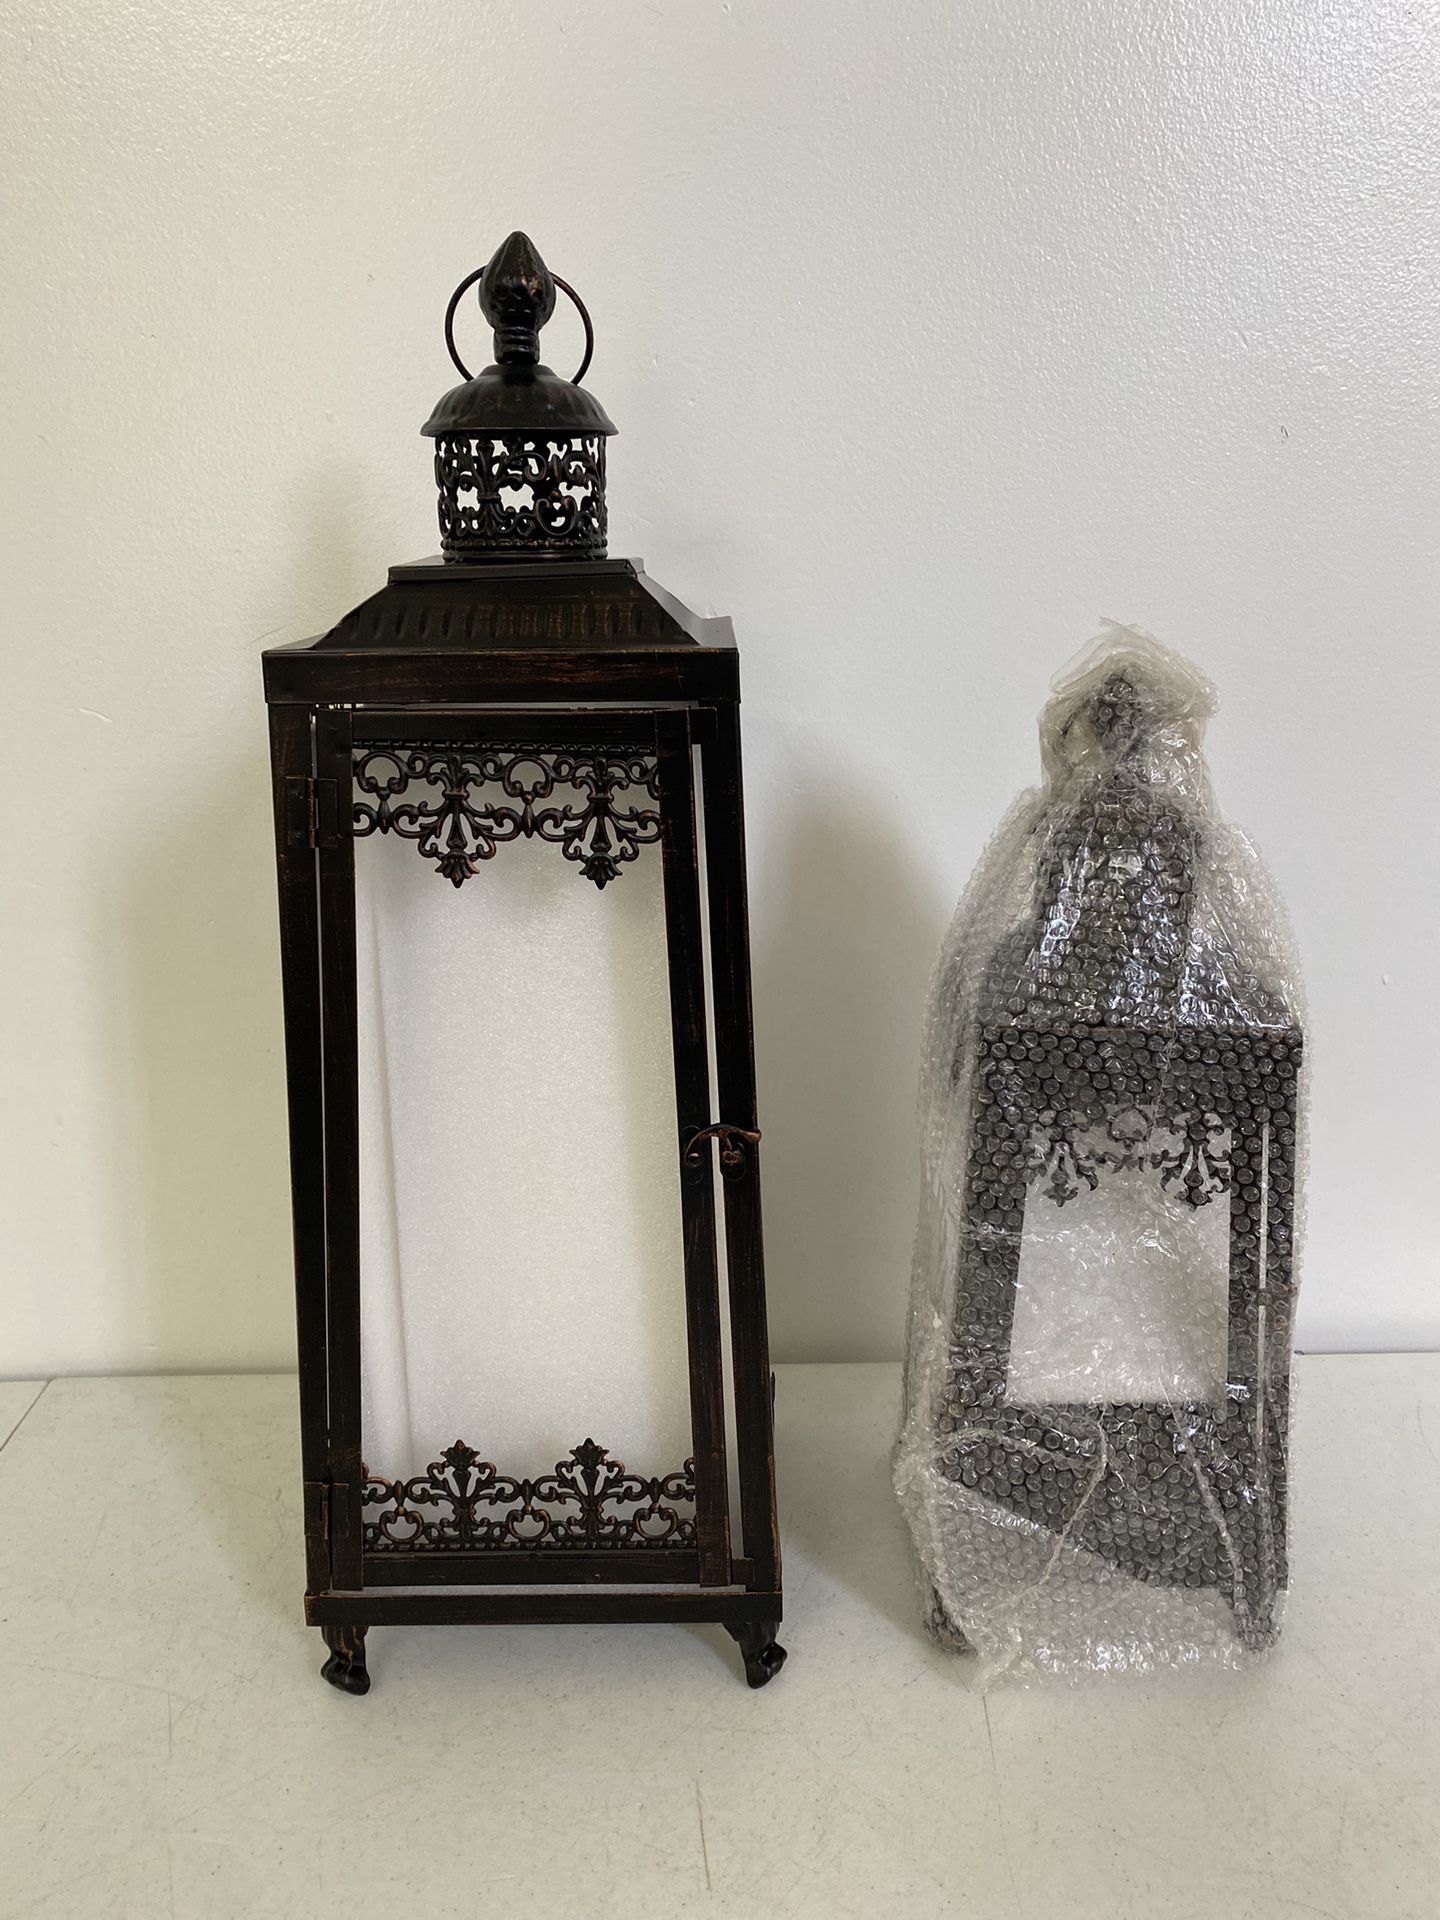 New! 2Pack Large small Outdoor Lanterns,Candle Holders Decorative for Patio, Metal Frame Vintage